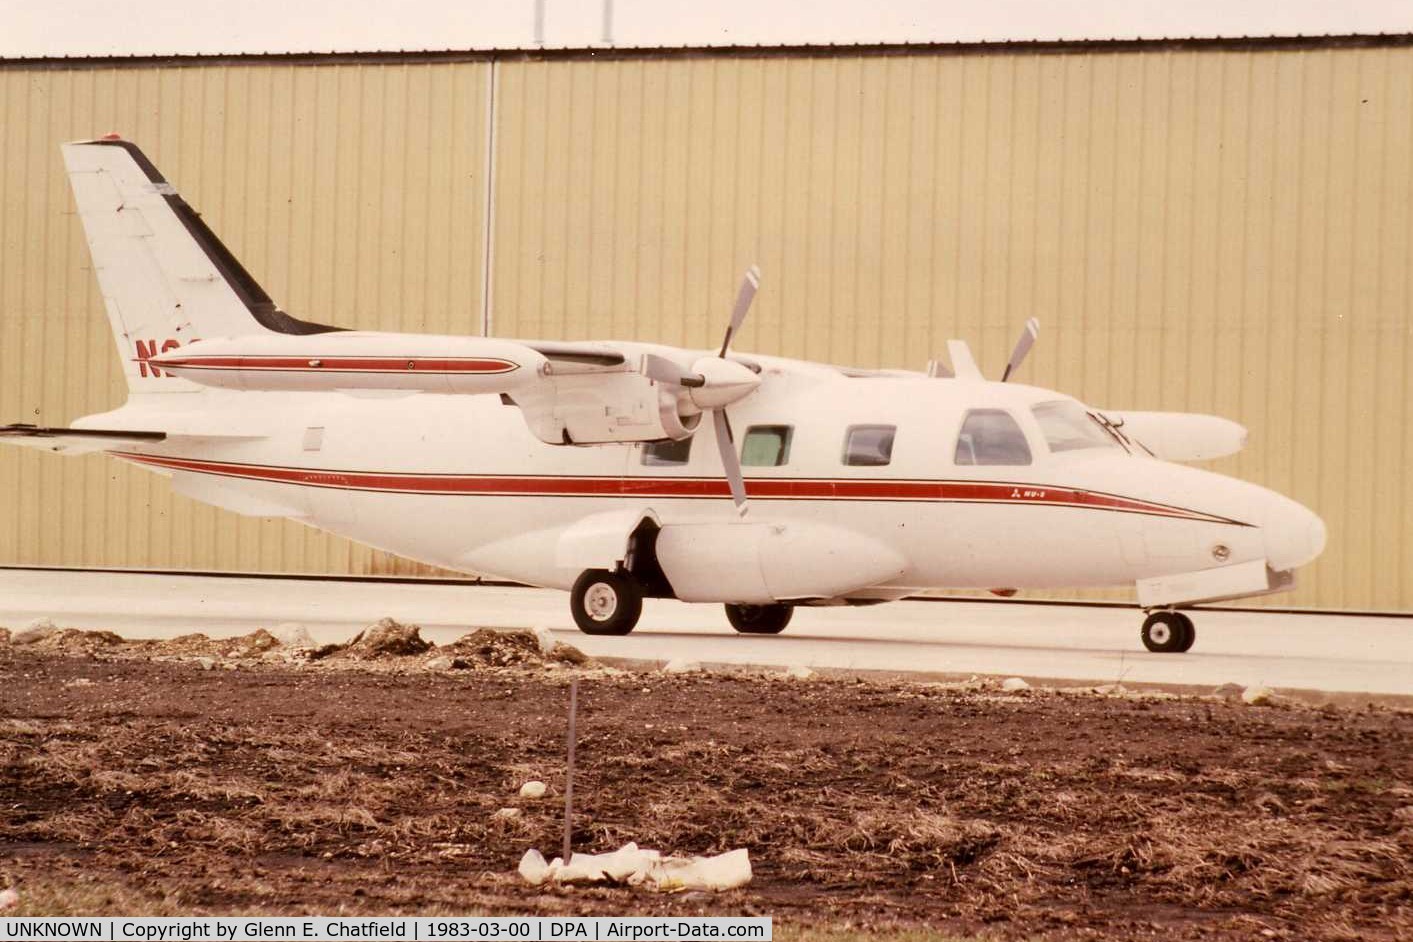 UNKNOWN, , Photo taken for aircraft recognition training.  Mitsubishi MU-2 at the west hangars